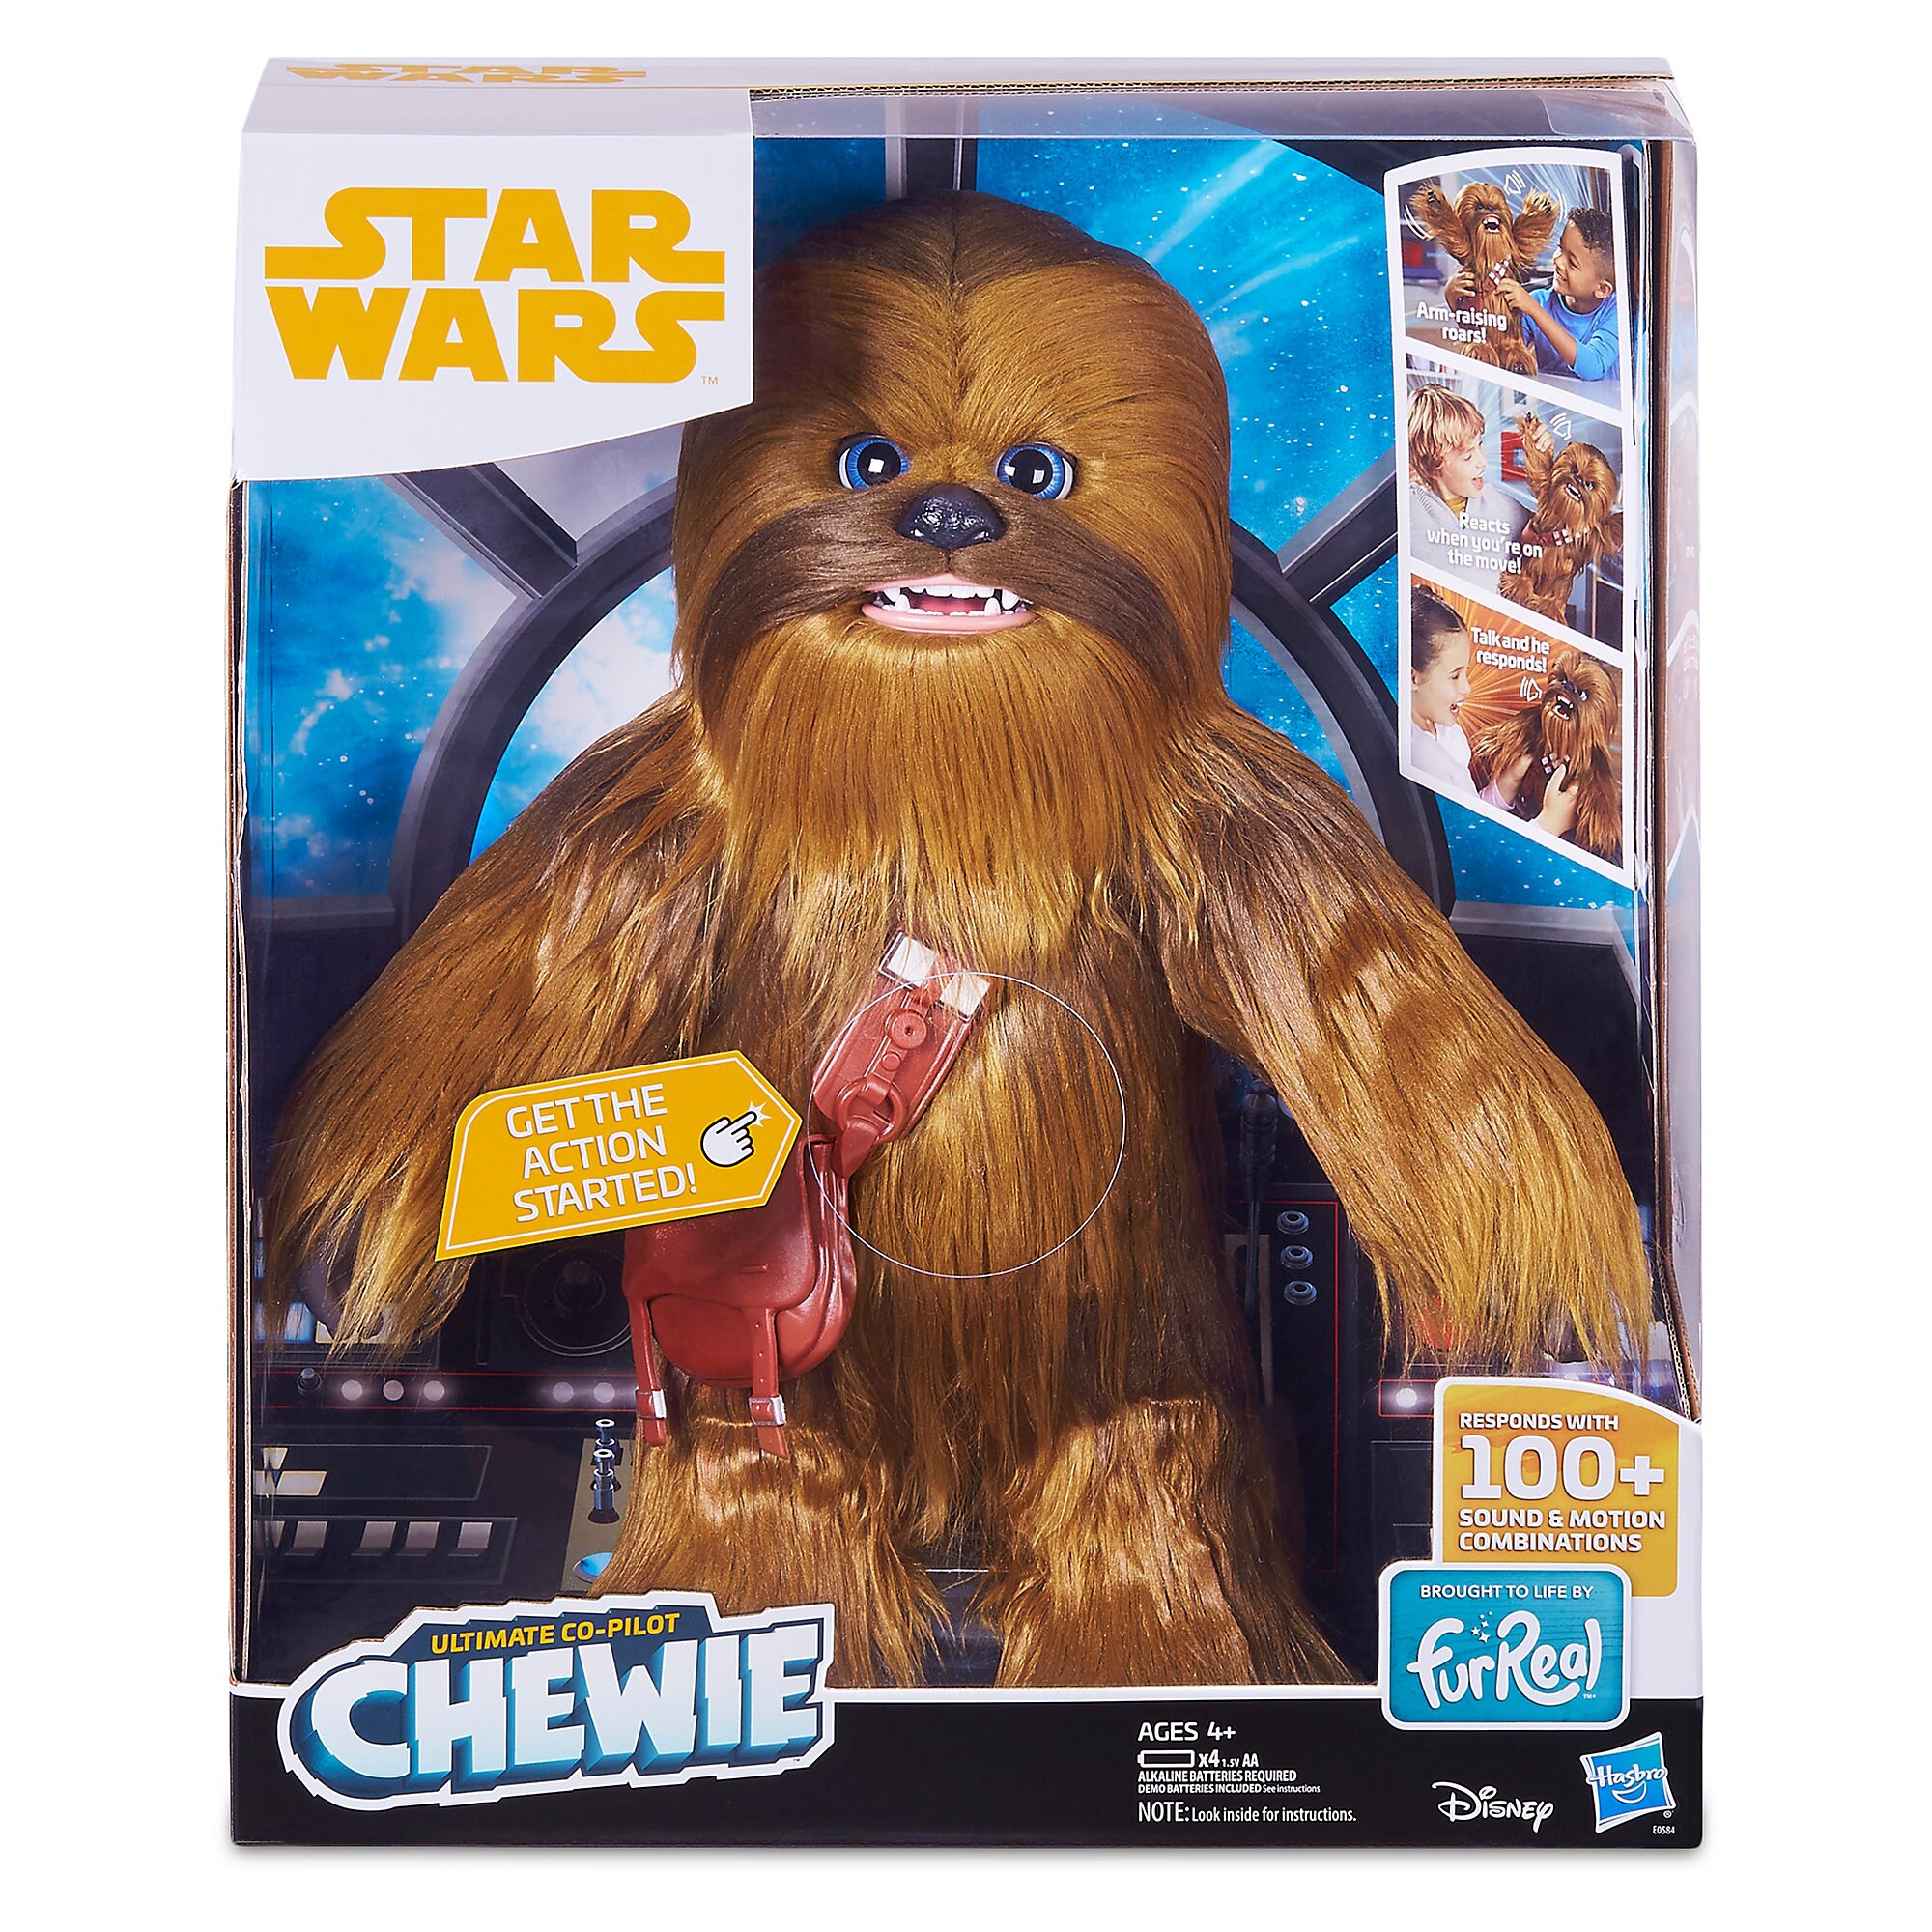 Chewbacca Interactive Toy by Hasbro - Star Wars